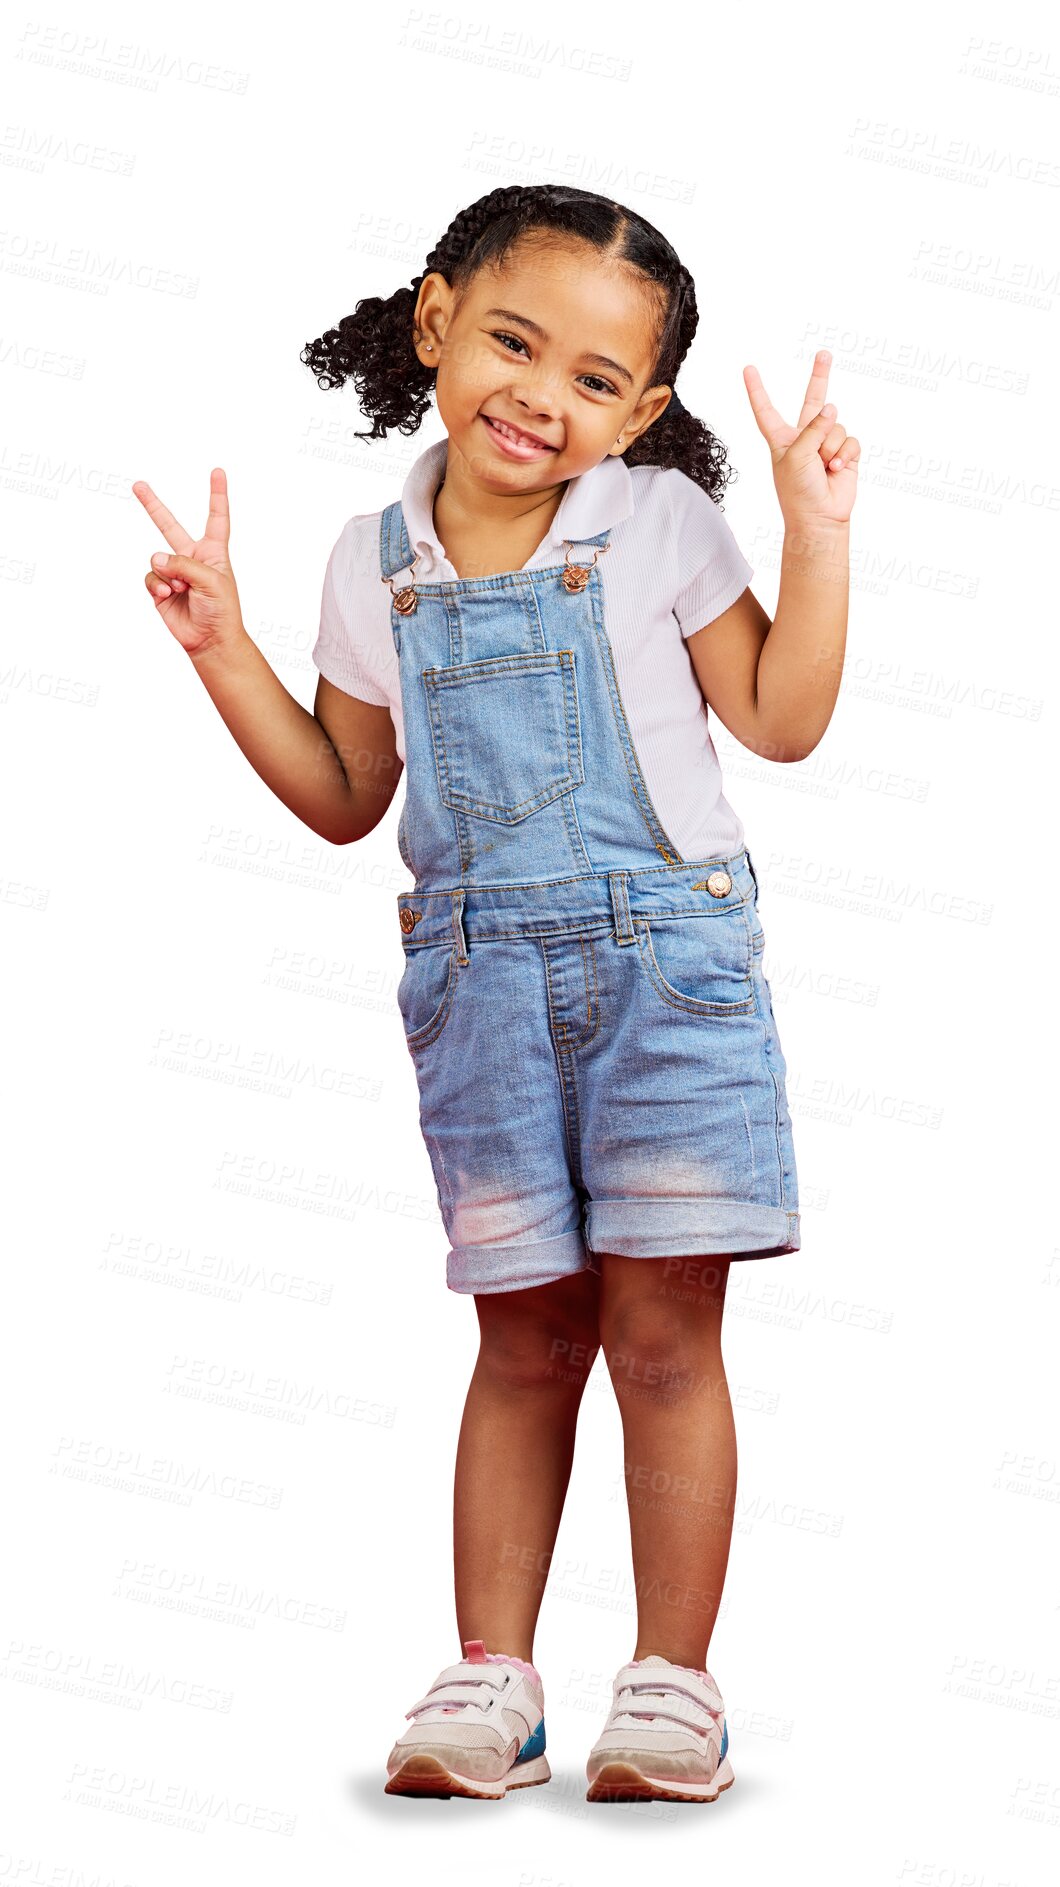 Buy stock photo Portrait, peace sign and girl with a smile, youth or summer outfit isolated on a transparent background. Female child, meme or kid with happiness, hand gesture or funny face with fashion, png or cute